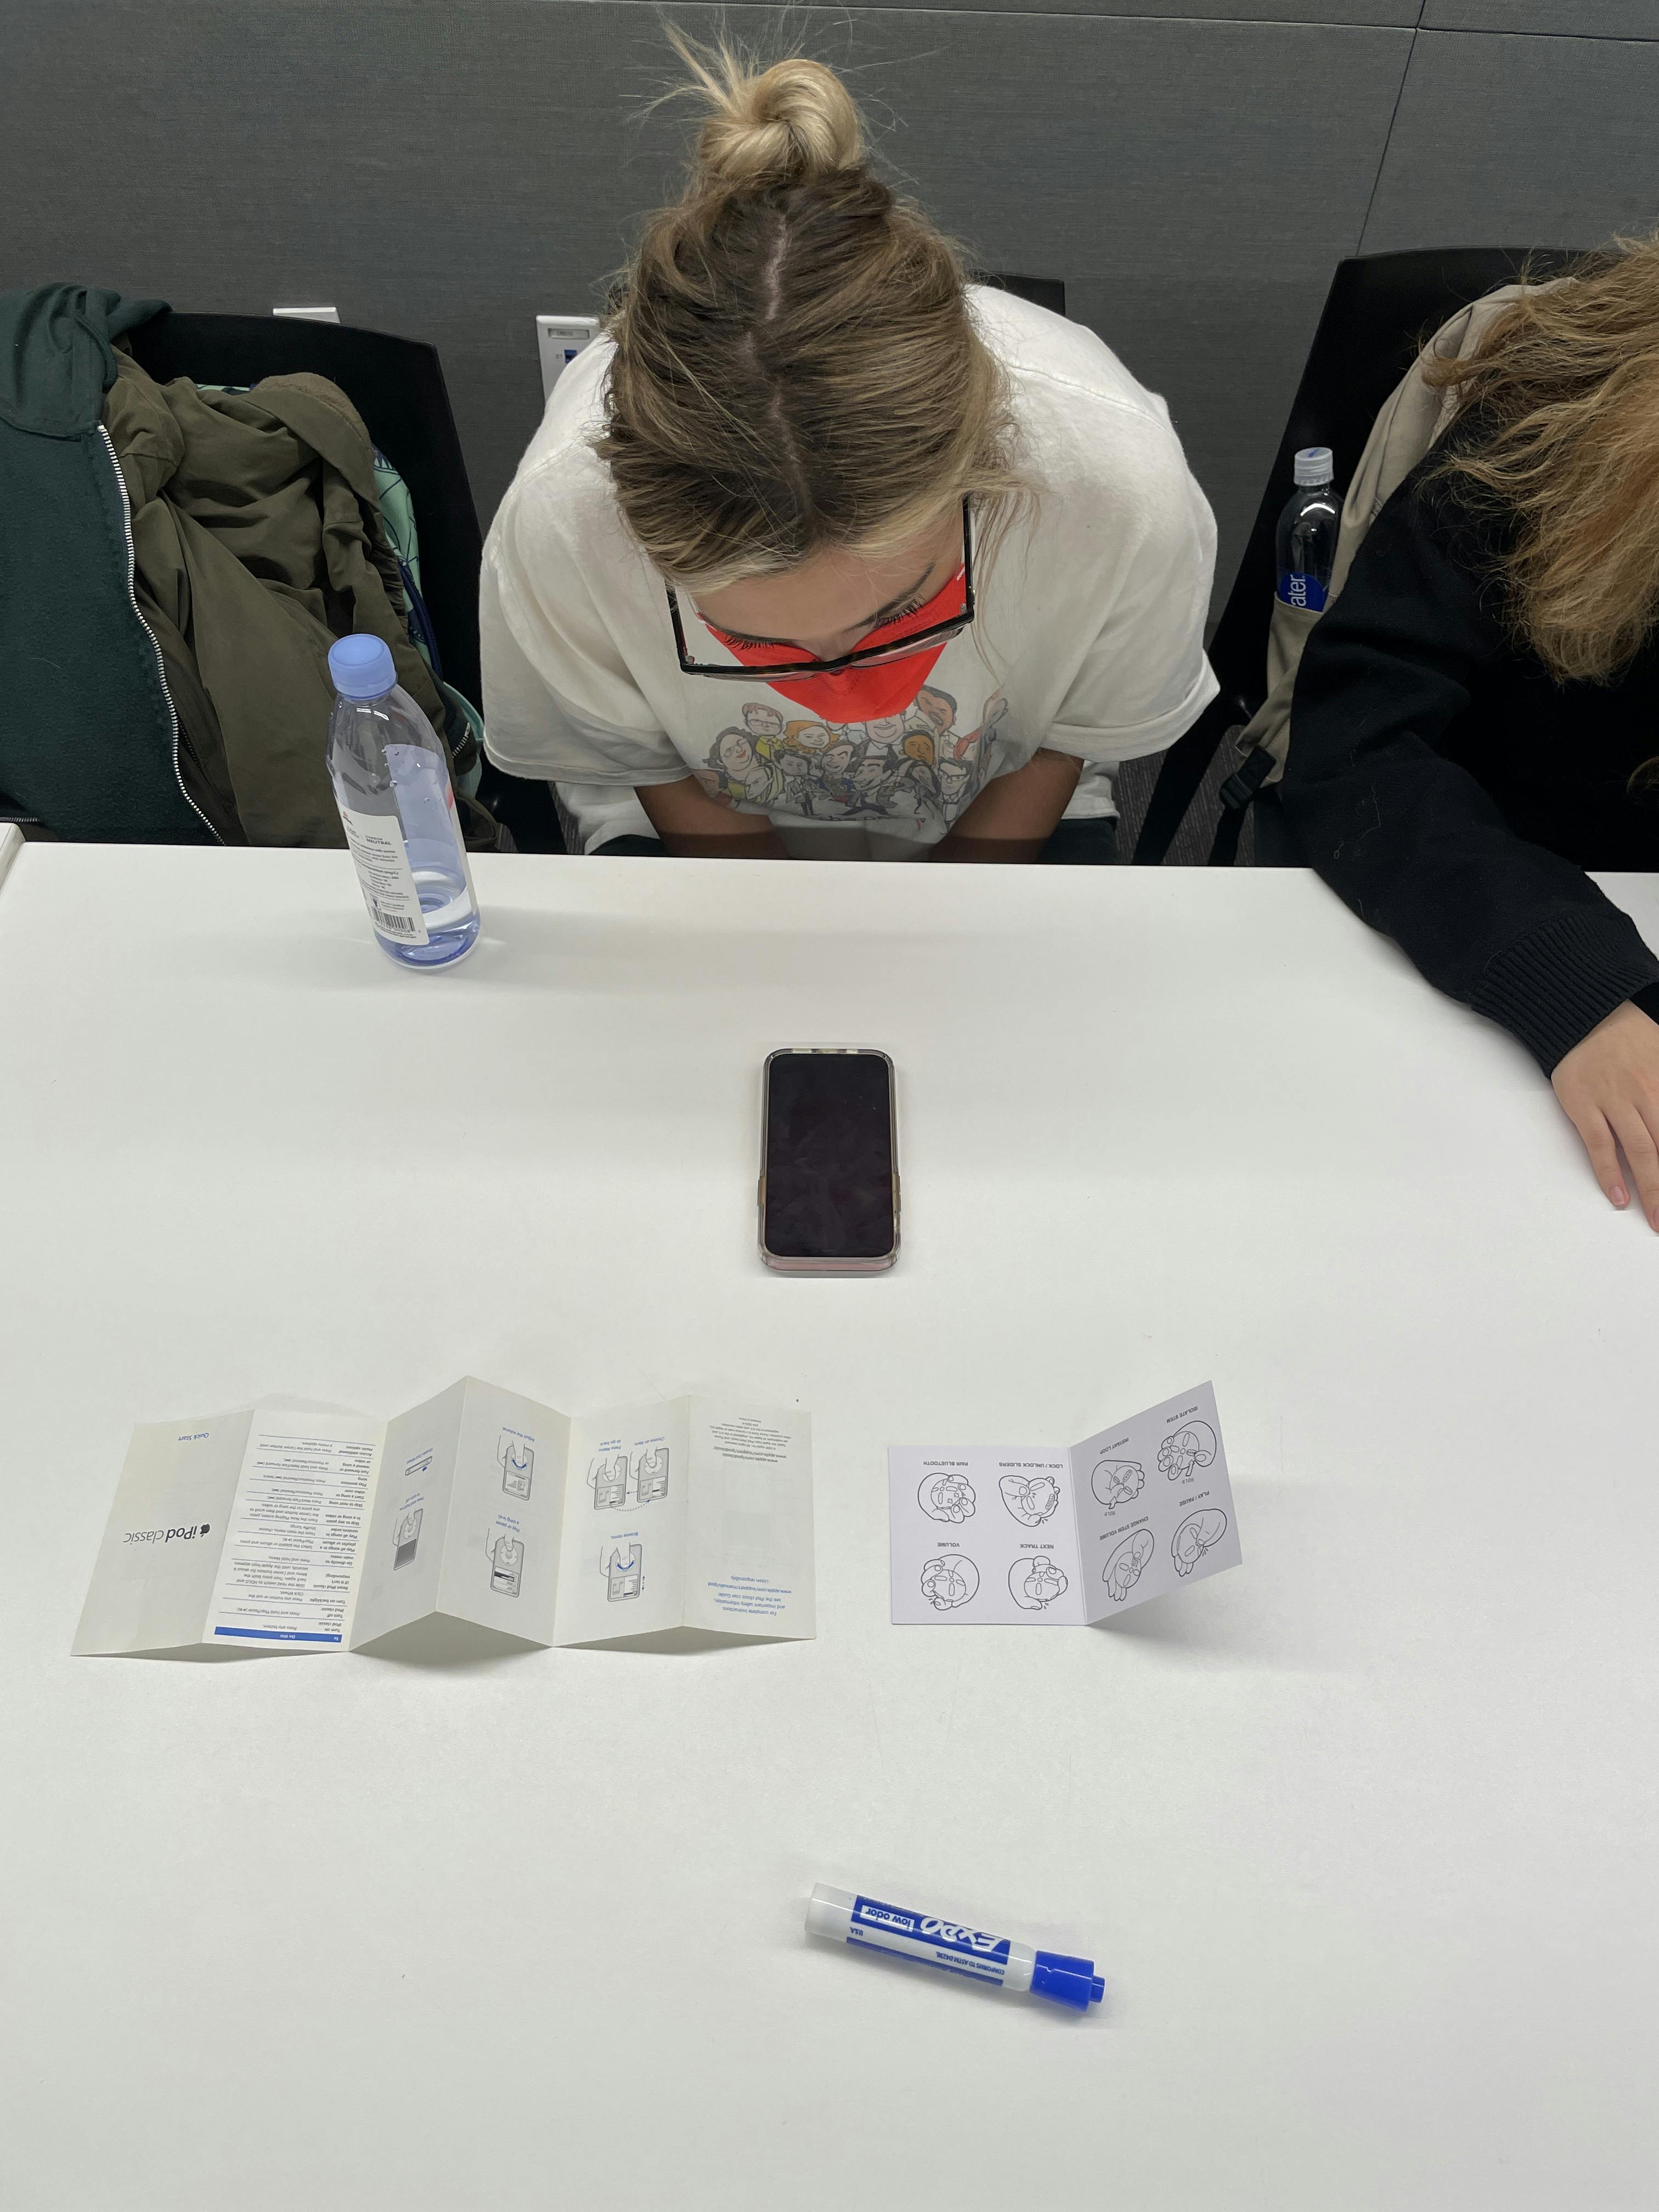 Users comparing the instructions for the iPod and the STEM player